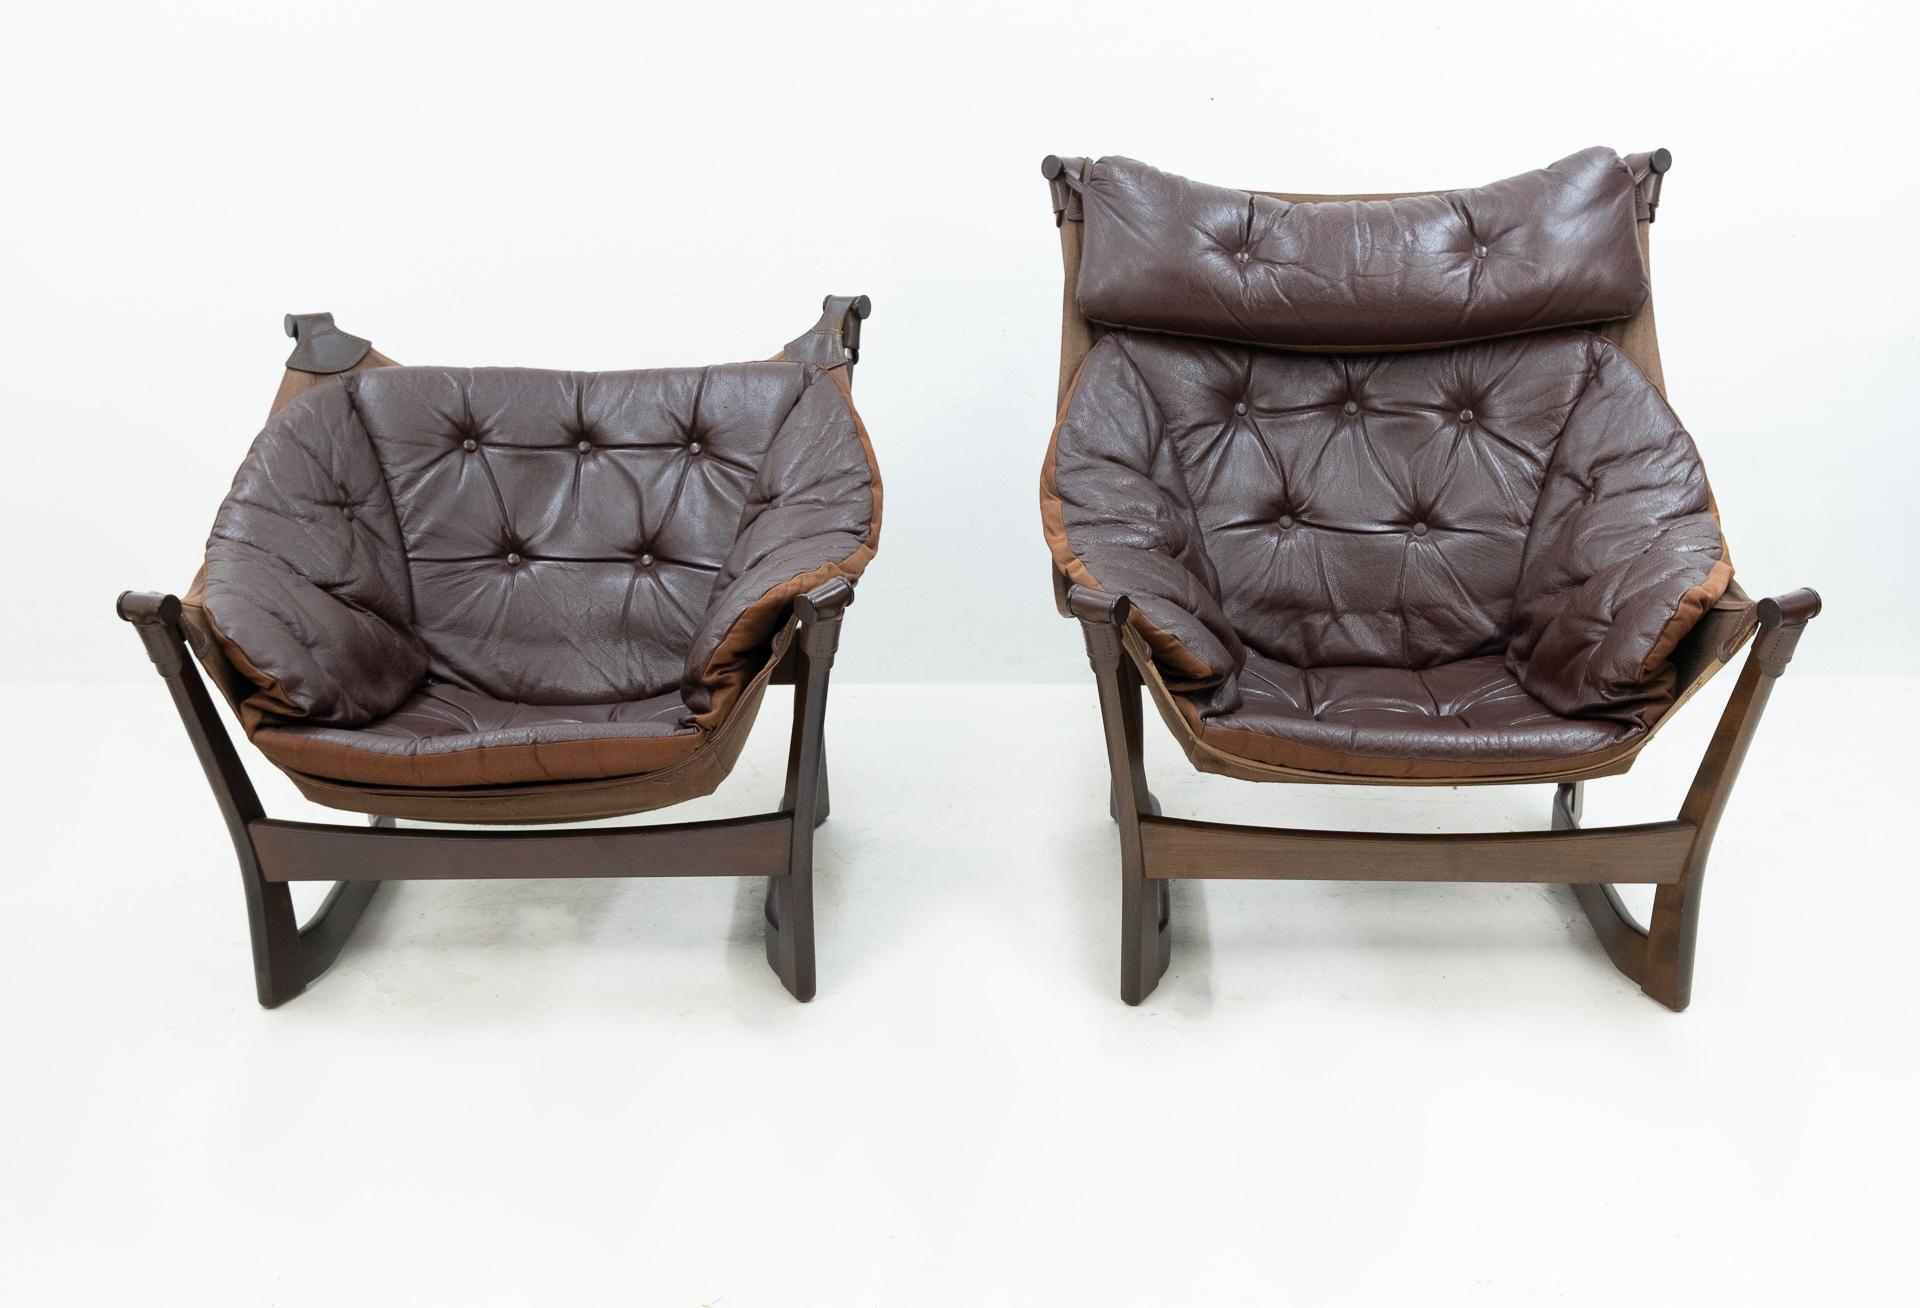 Teak and Leather Pair of 'Trega' Chairs by Tormod Alnaes for Sørliemøbler 1